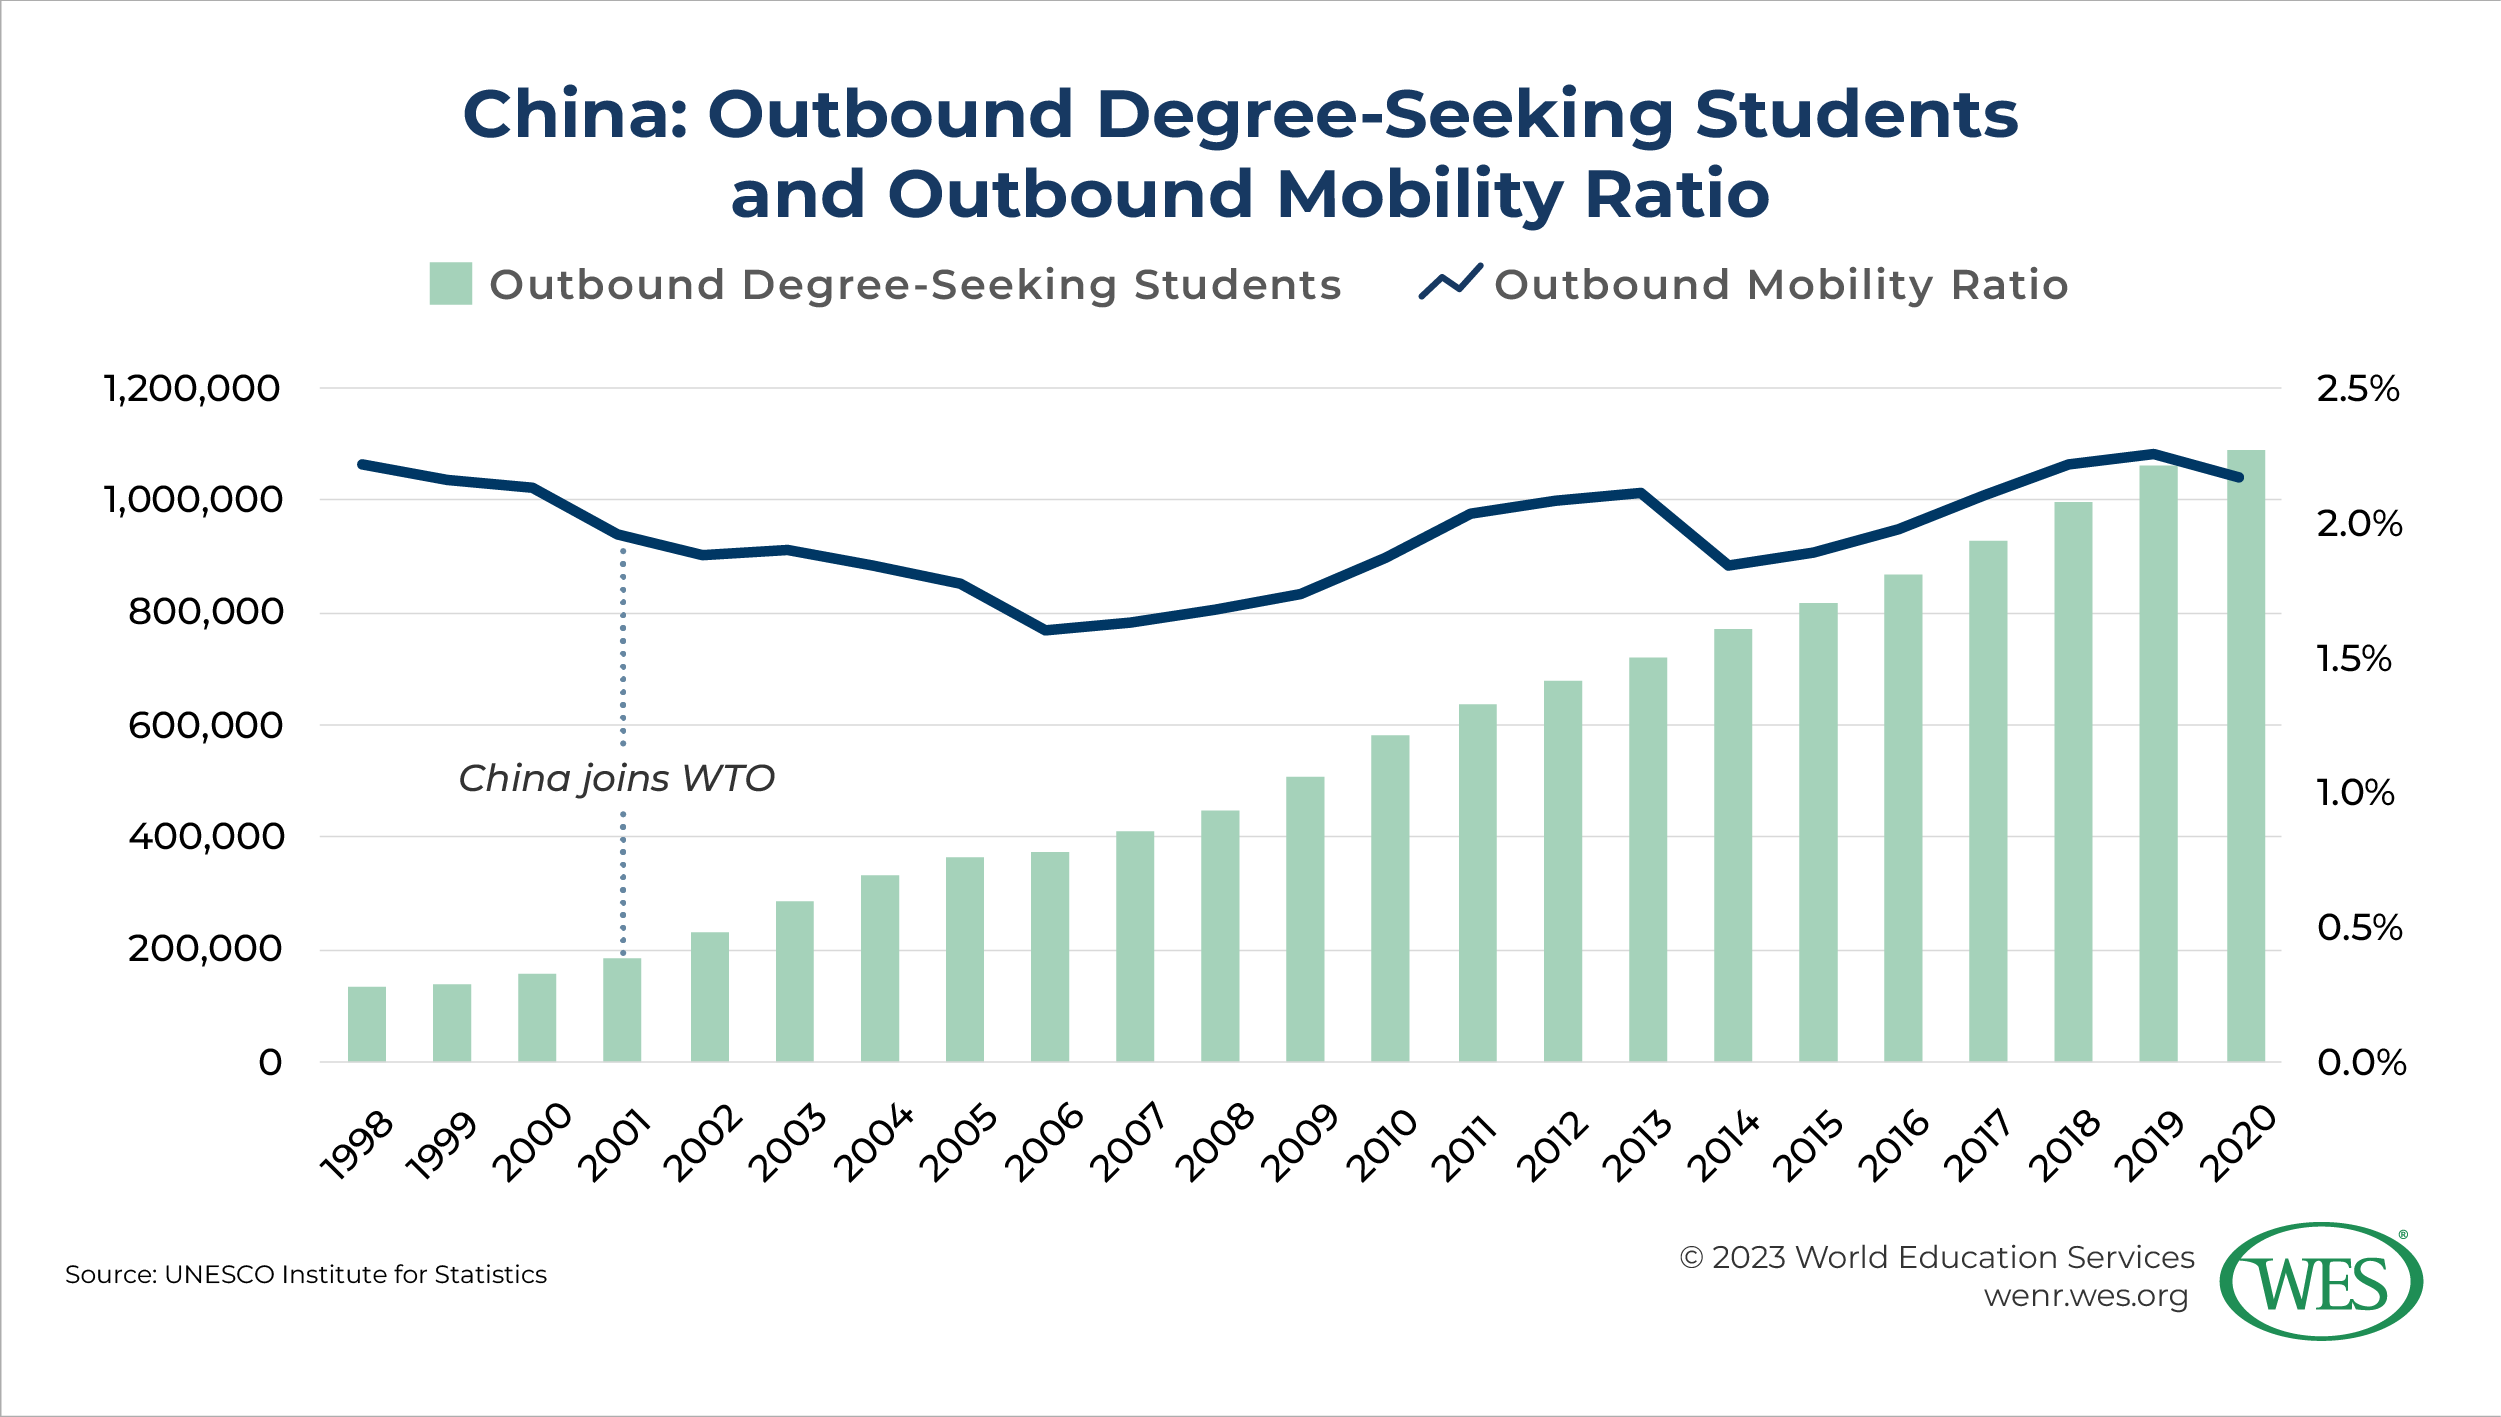 A chart showing China's outbound degree-seeking students and outbound mobility ratio between 1998 and 2020. 